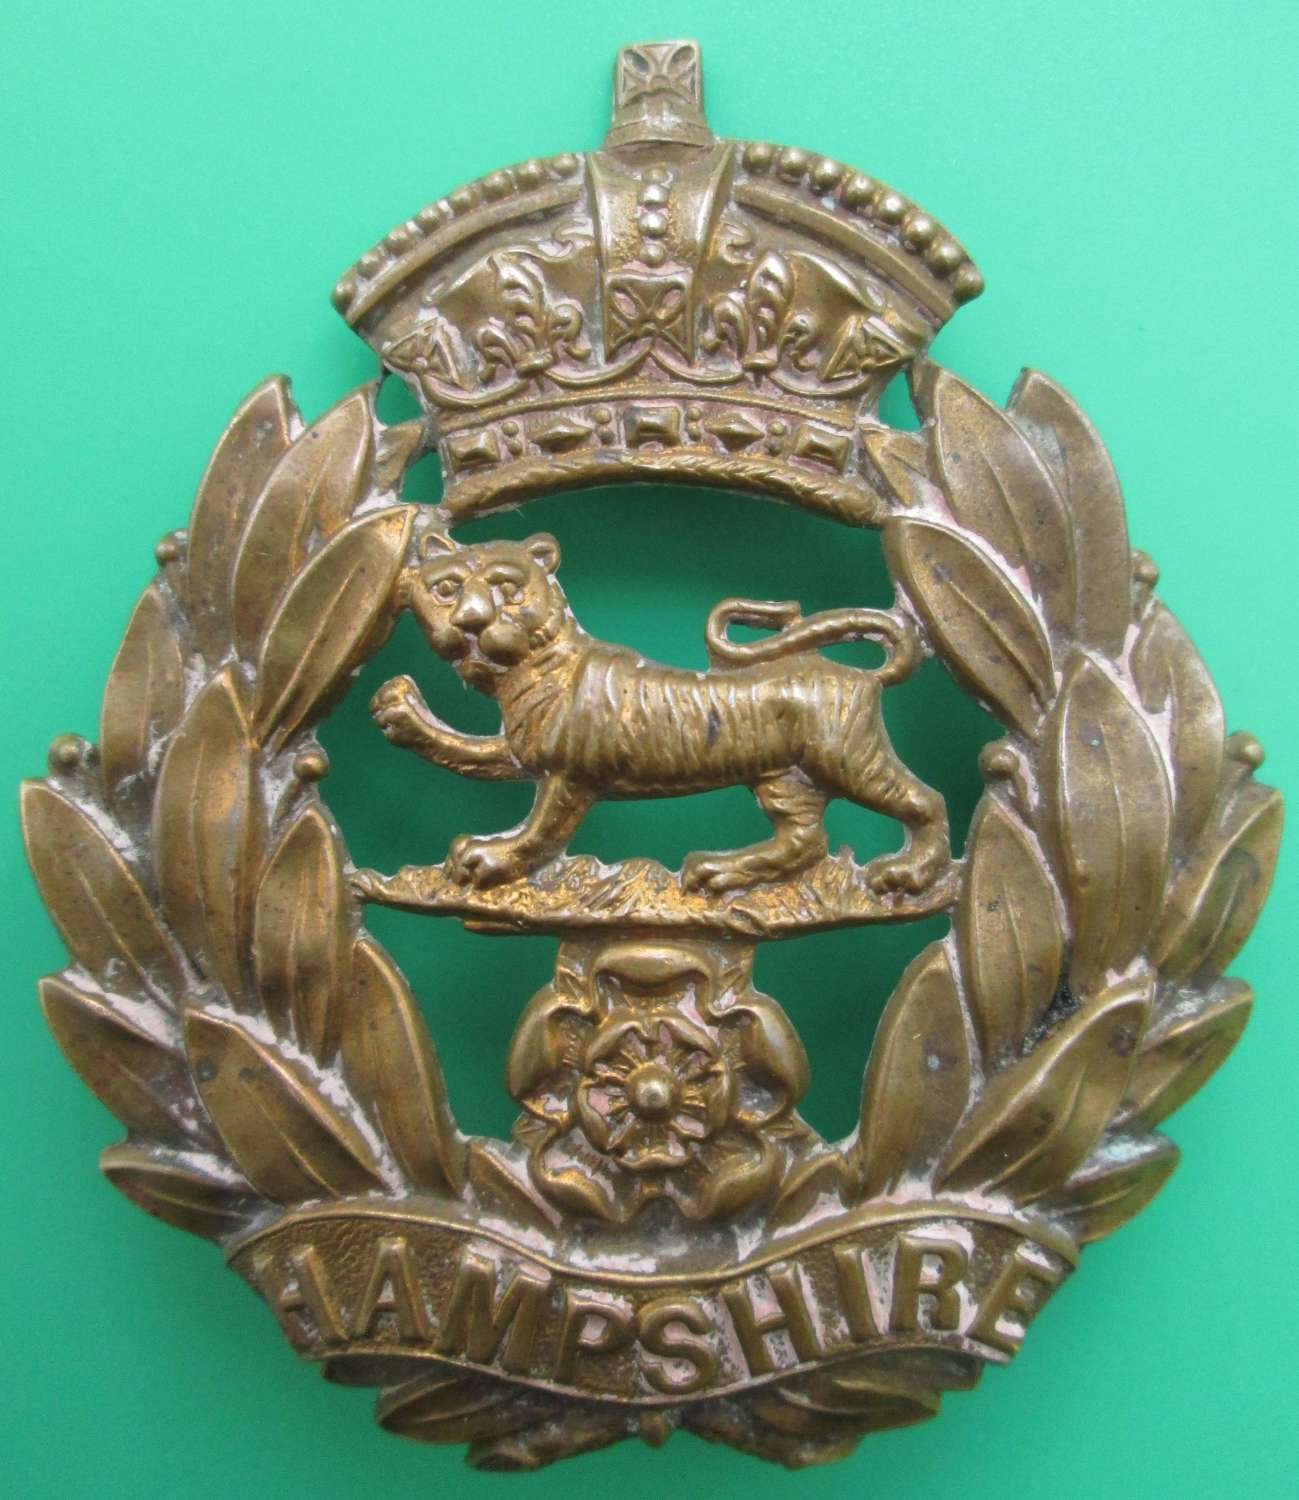 A GOOD POST 1881 HAMPSHIRE REGT OTHER RANKS GLENGARRY BADGE